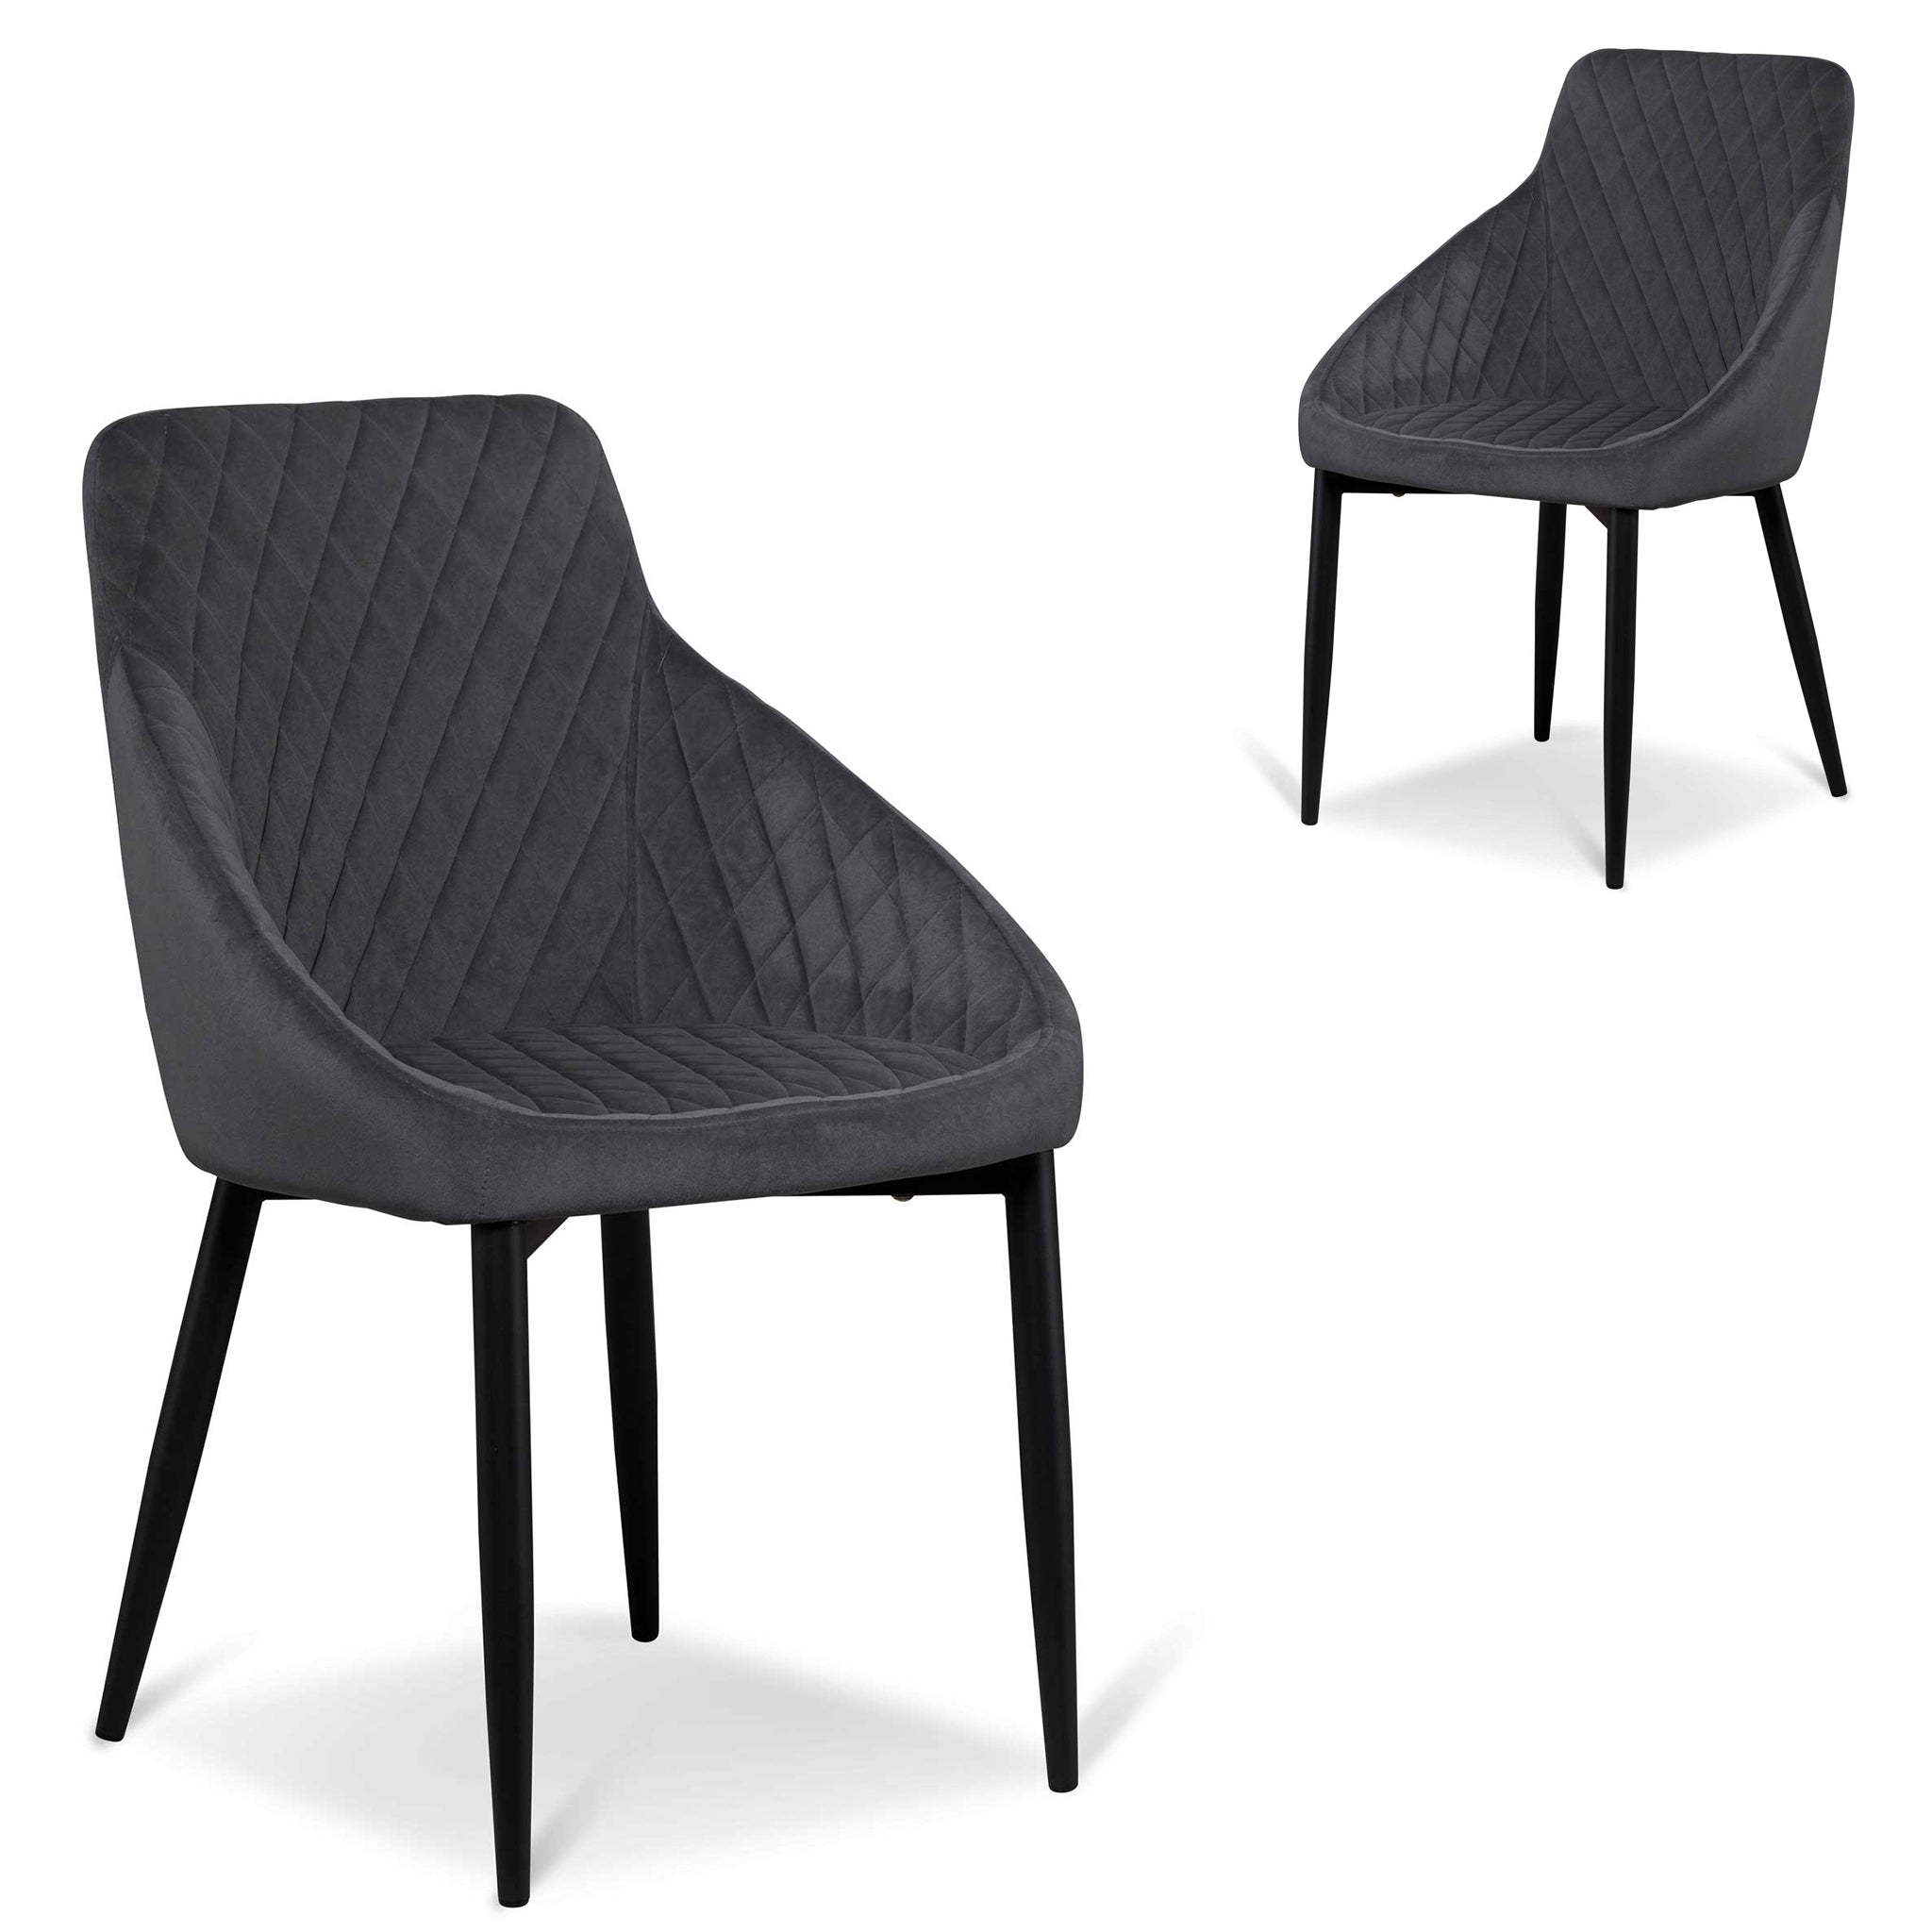 Set of 2 Rome Dining Chair - Grey Velvet - Dining Chairs